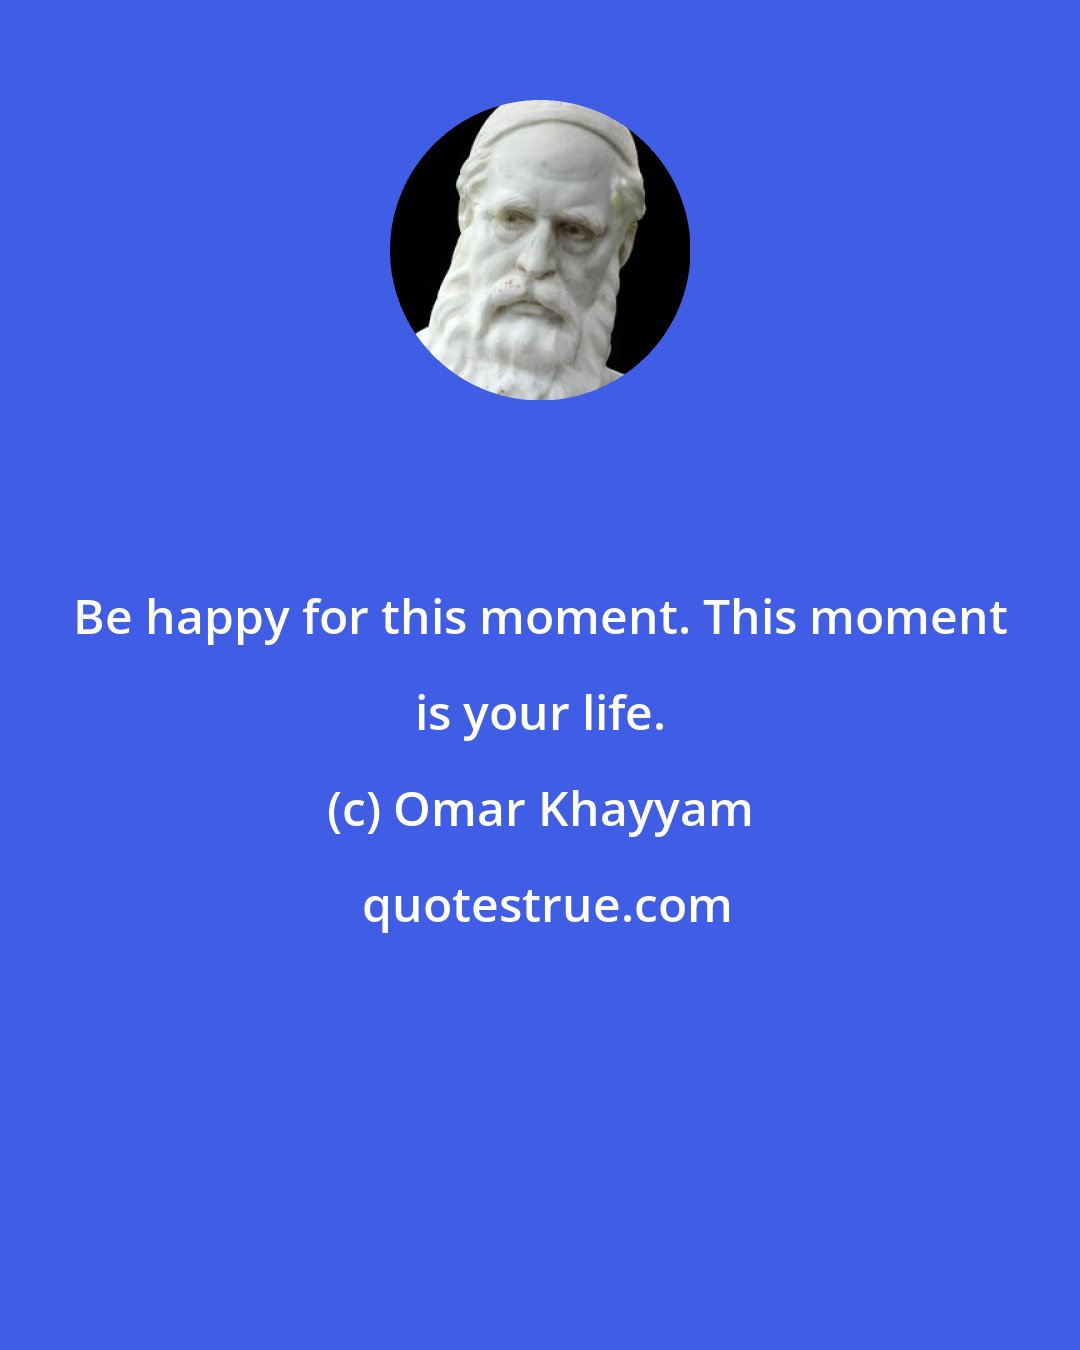 Omar Khayyam: Be happy for this moment. This moment is your life.